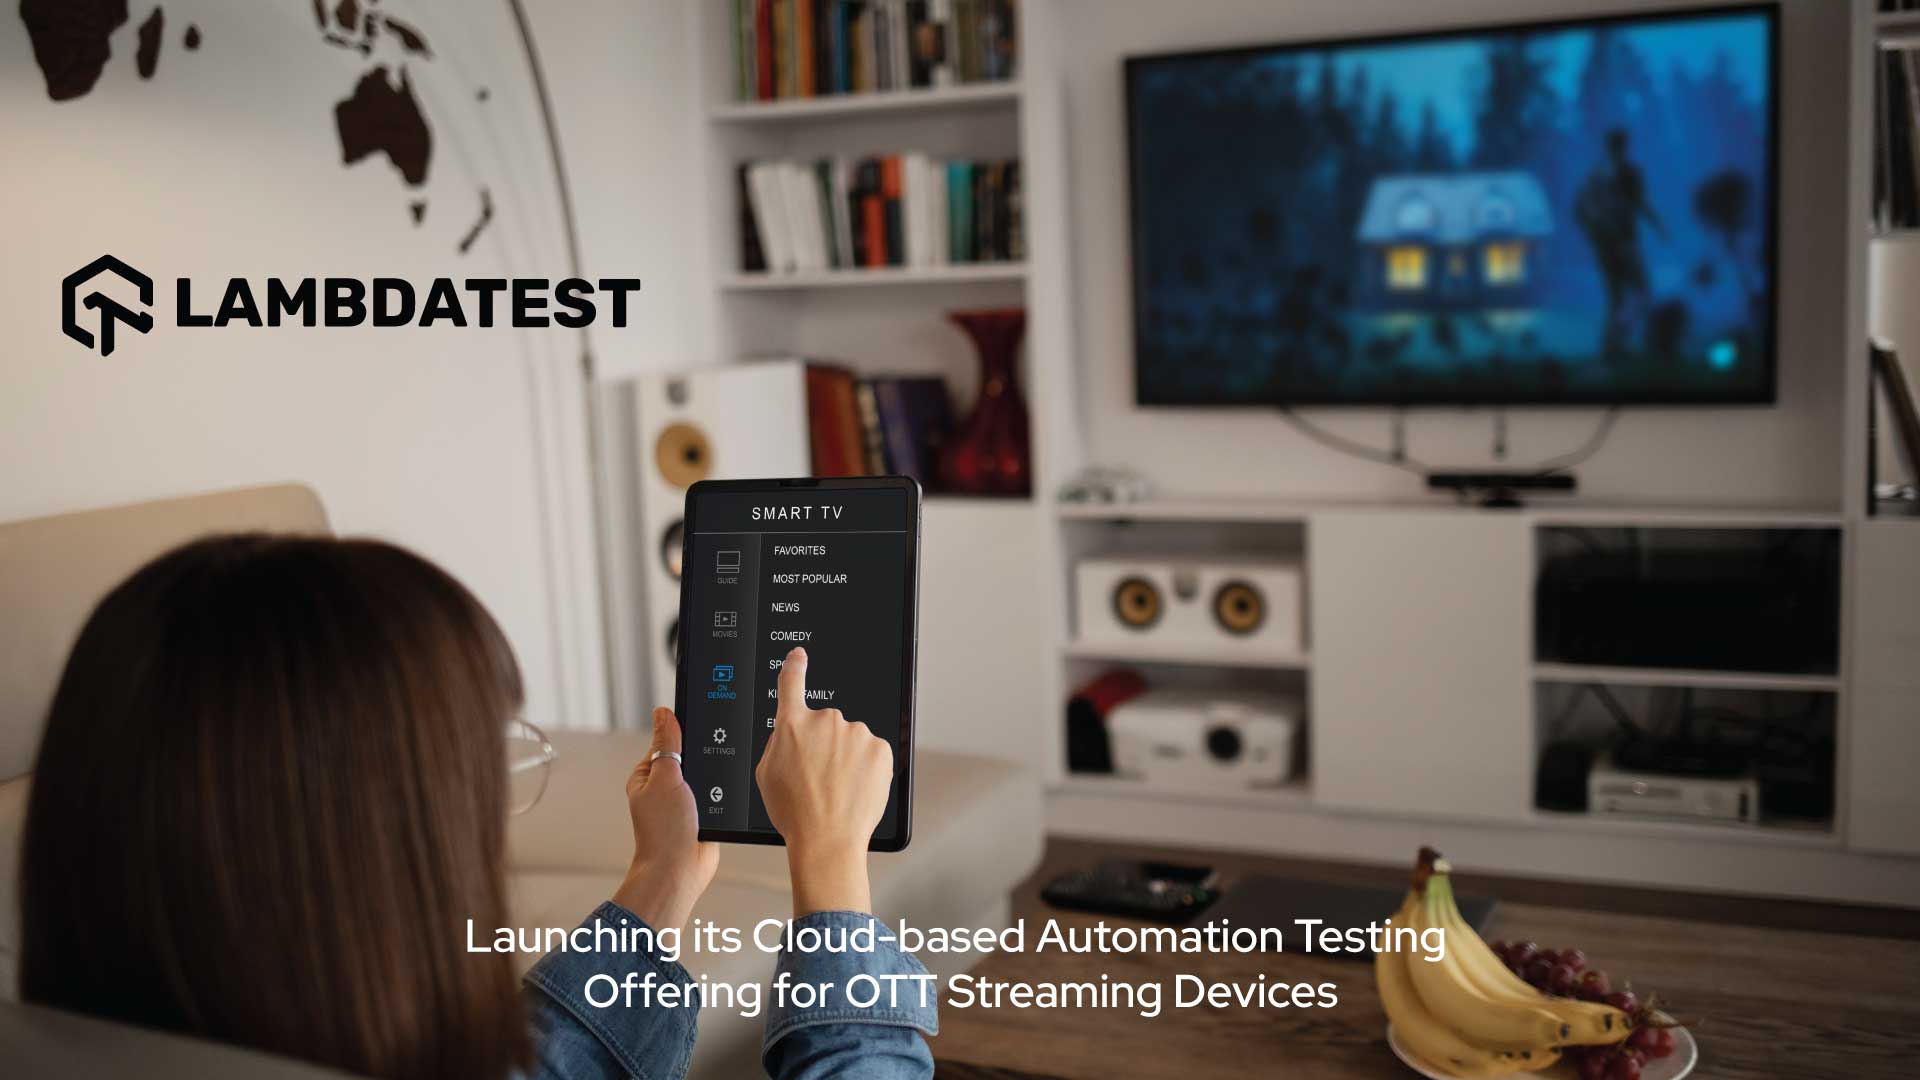 LambdaTest Launches Automation Testing for OTT Streaming Devices